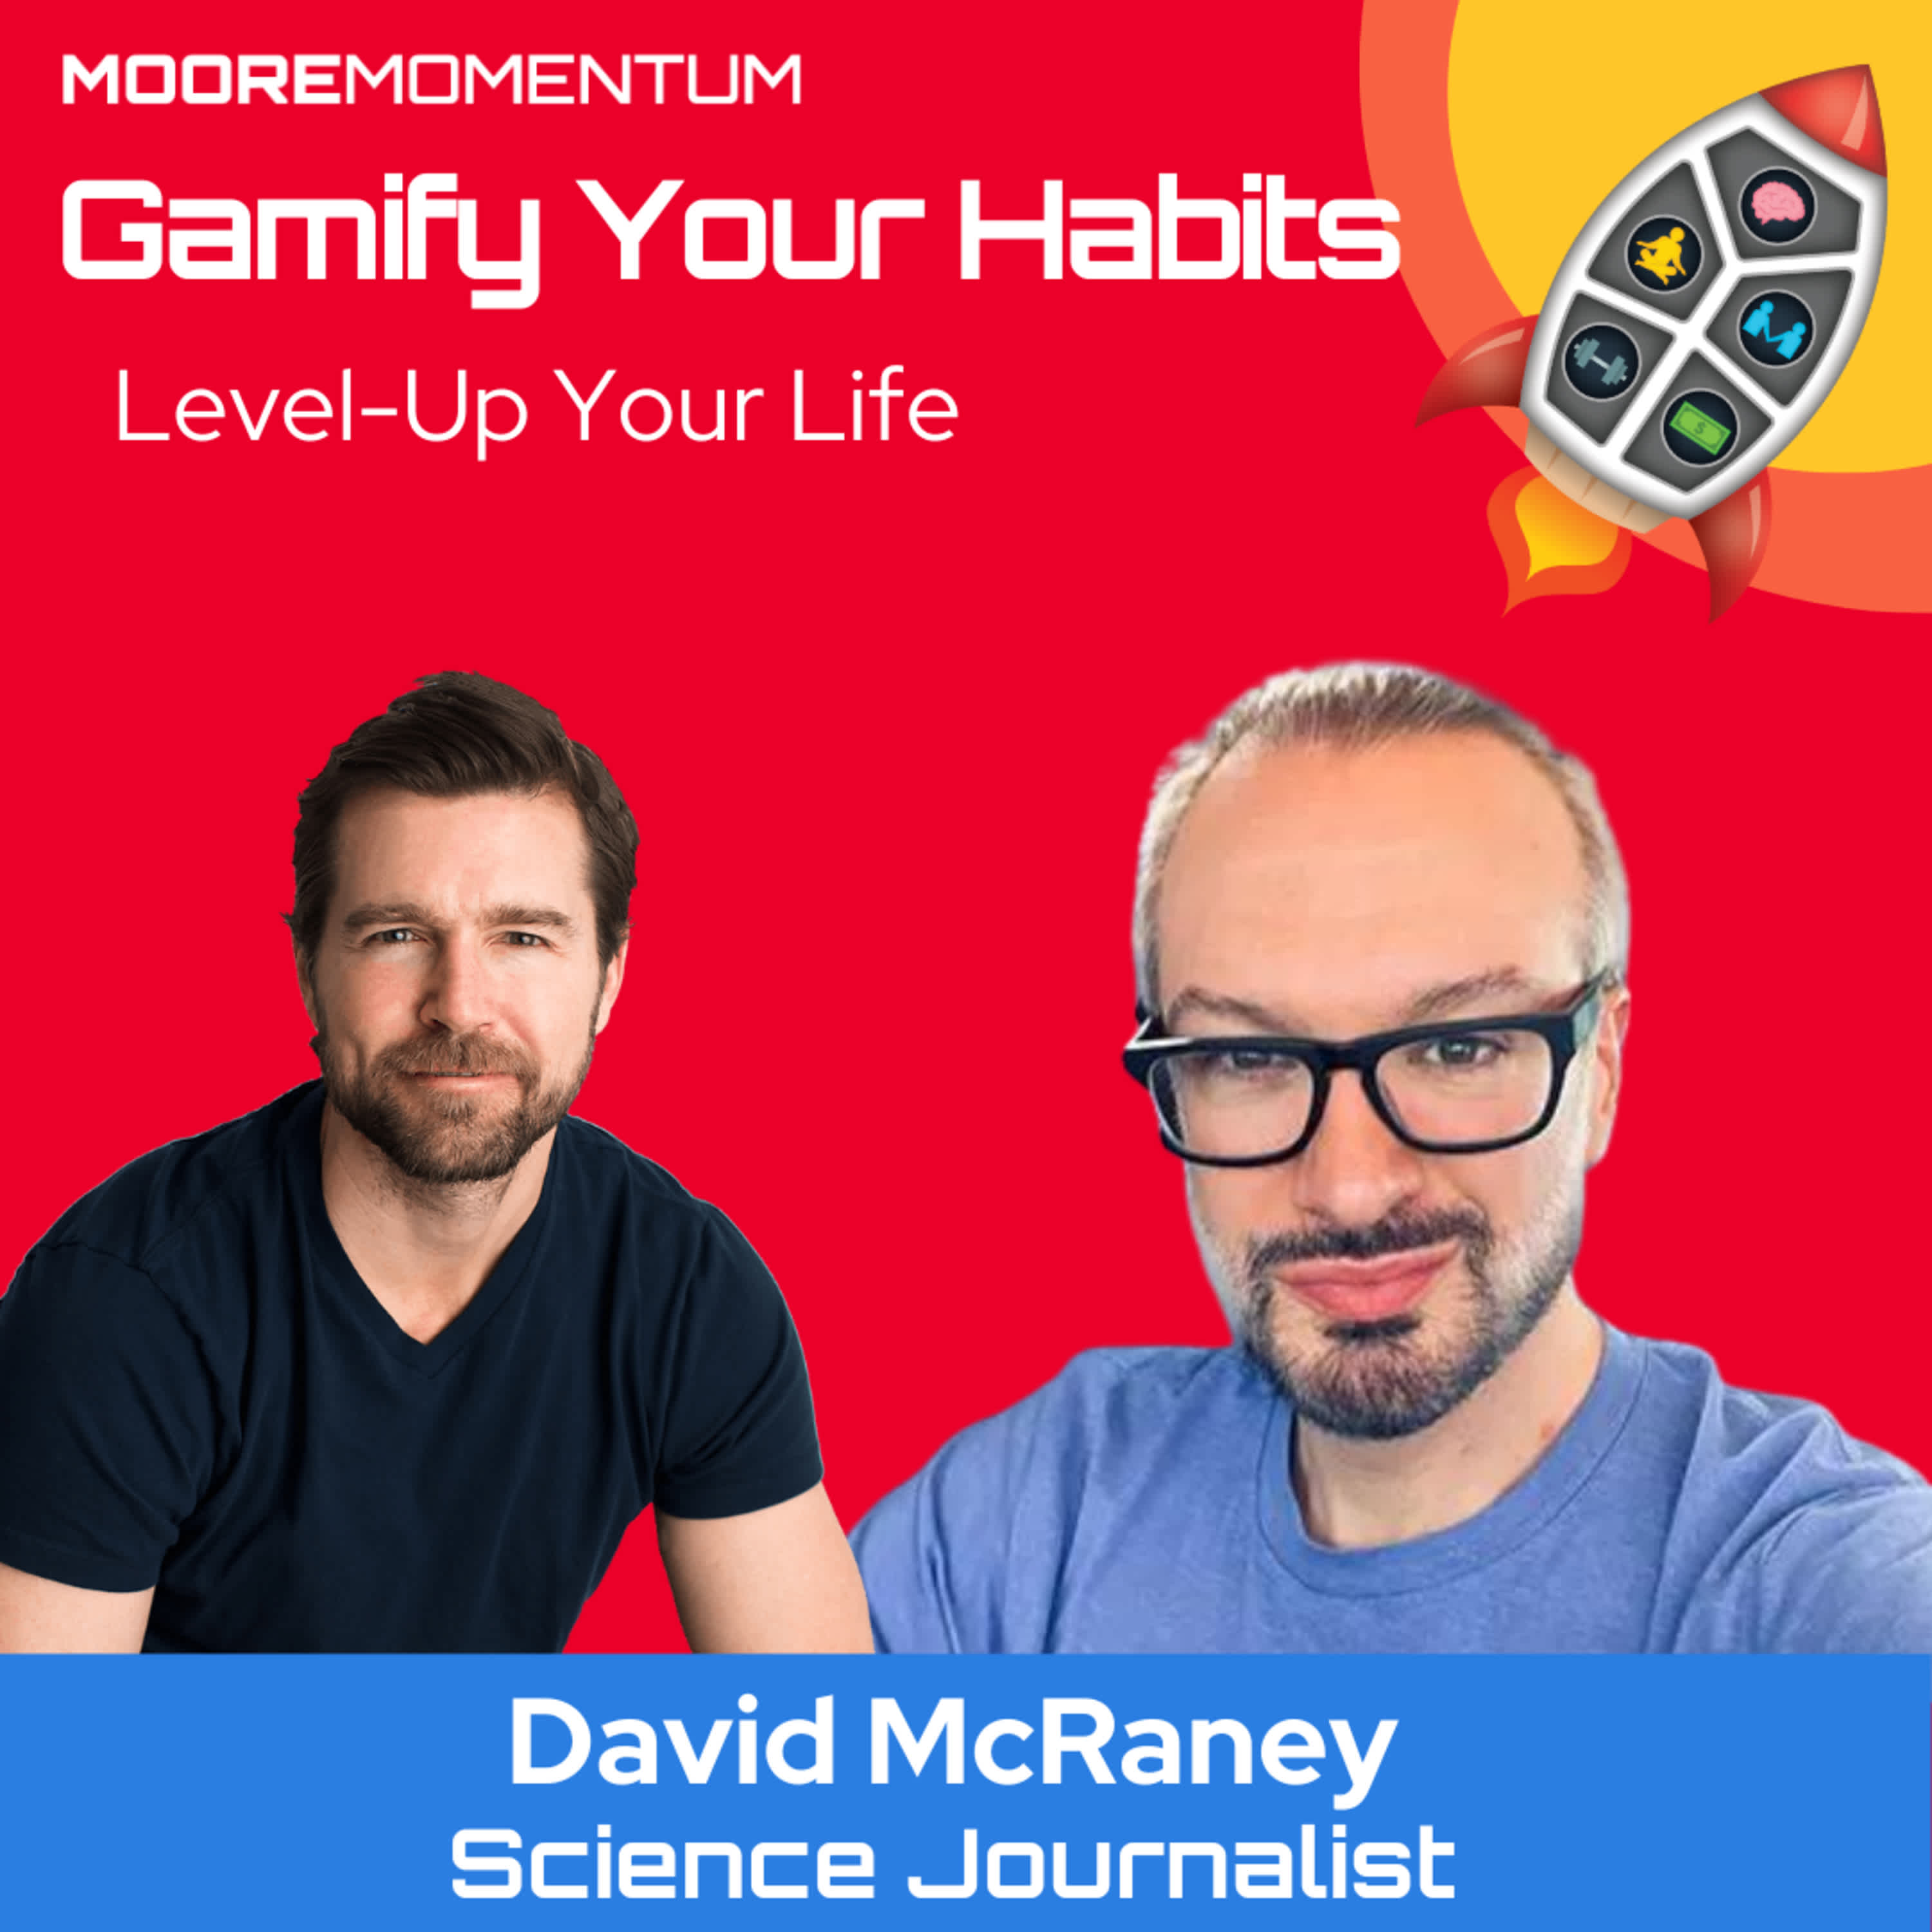 In How to Change Minds, host Will Moore sits down with David McRaney, to discuss the intricacies of our minds. David McRaney breaks down why we are biologically programmed to disagree with others so strongly when our opinions differ. 